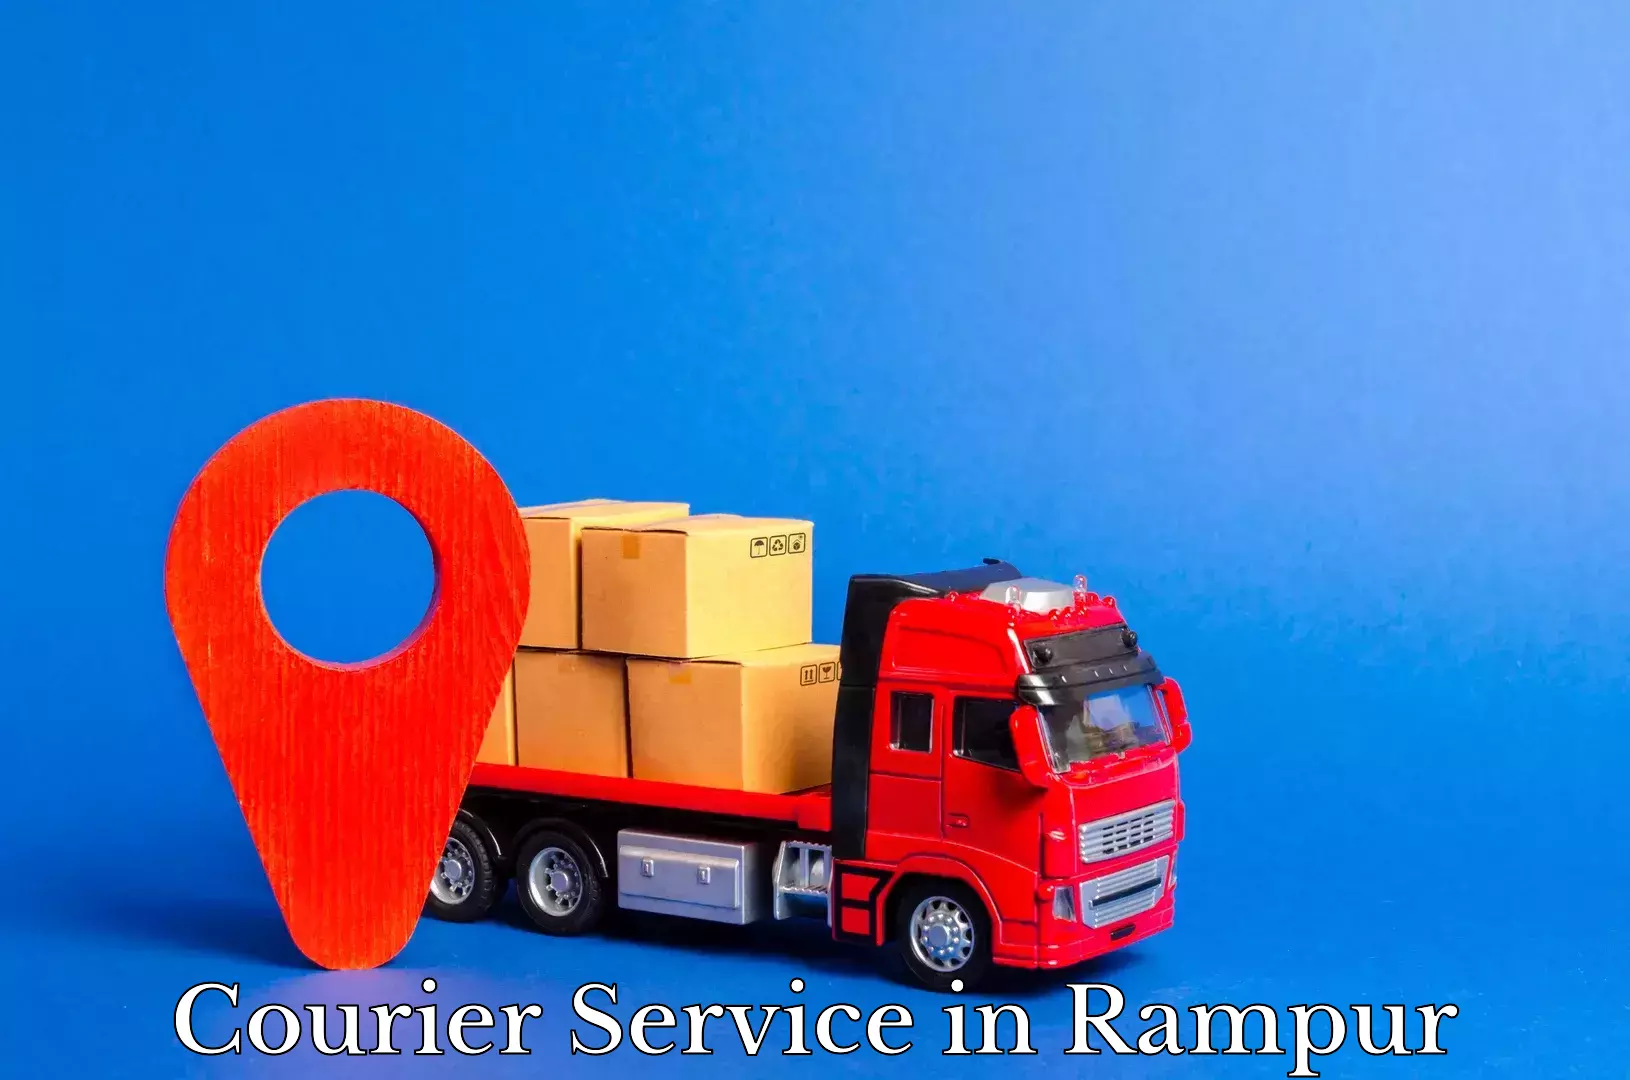 Personal parcel delivery in Rampur